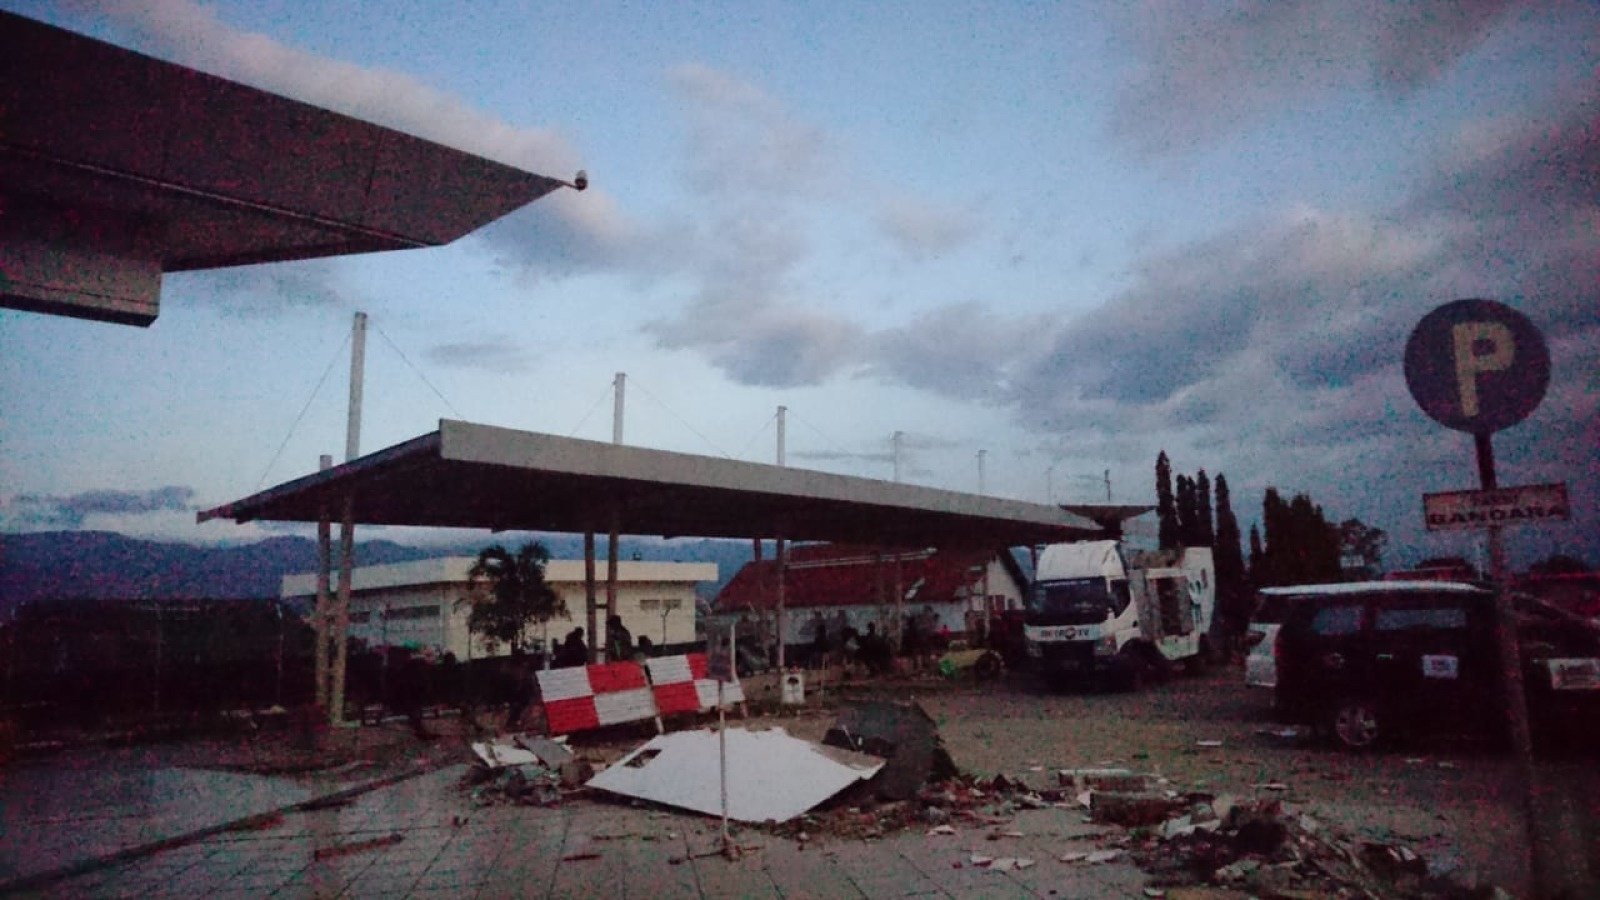 Destructions in Palu town, Sulawesi island. CIS-Timor, HI partners, are assessing the needs of populations severely hit by the earthquake and tsunami.